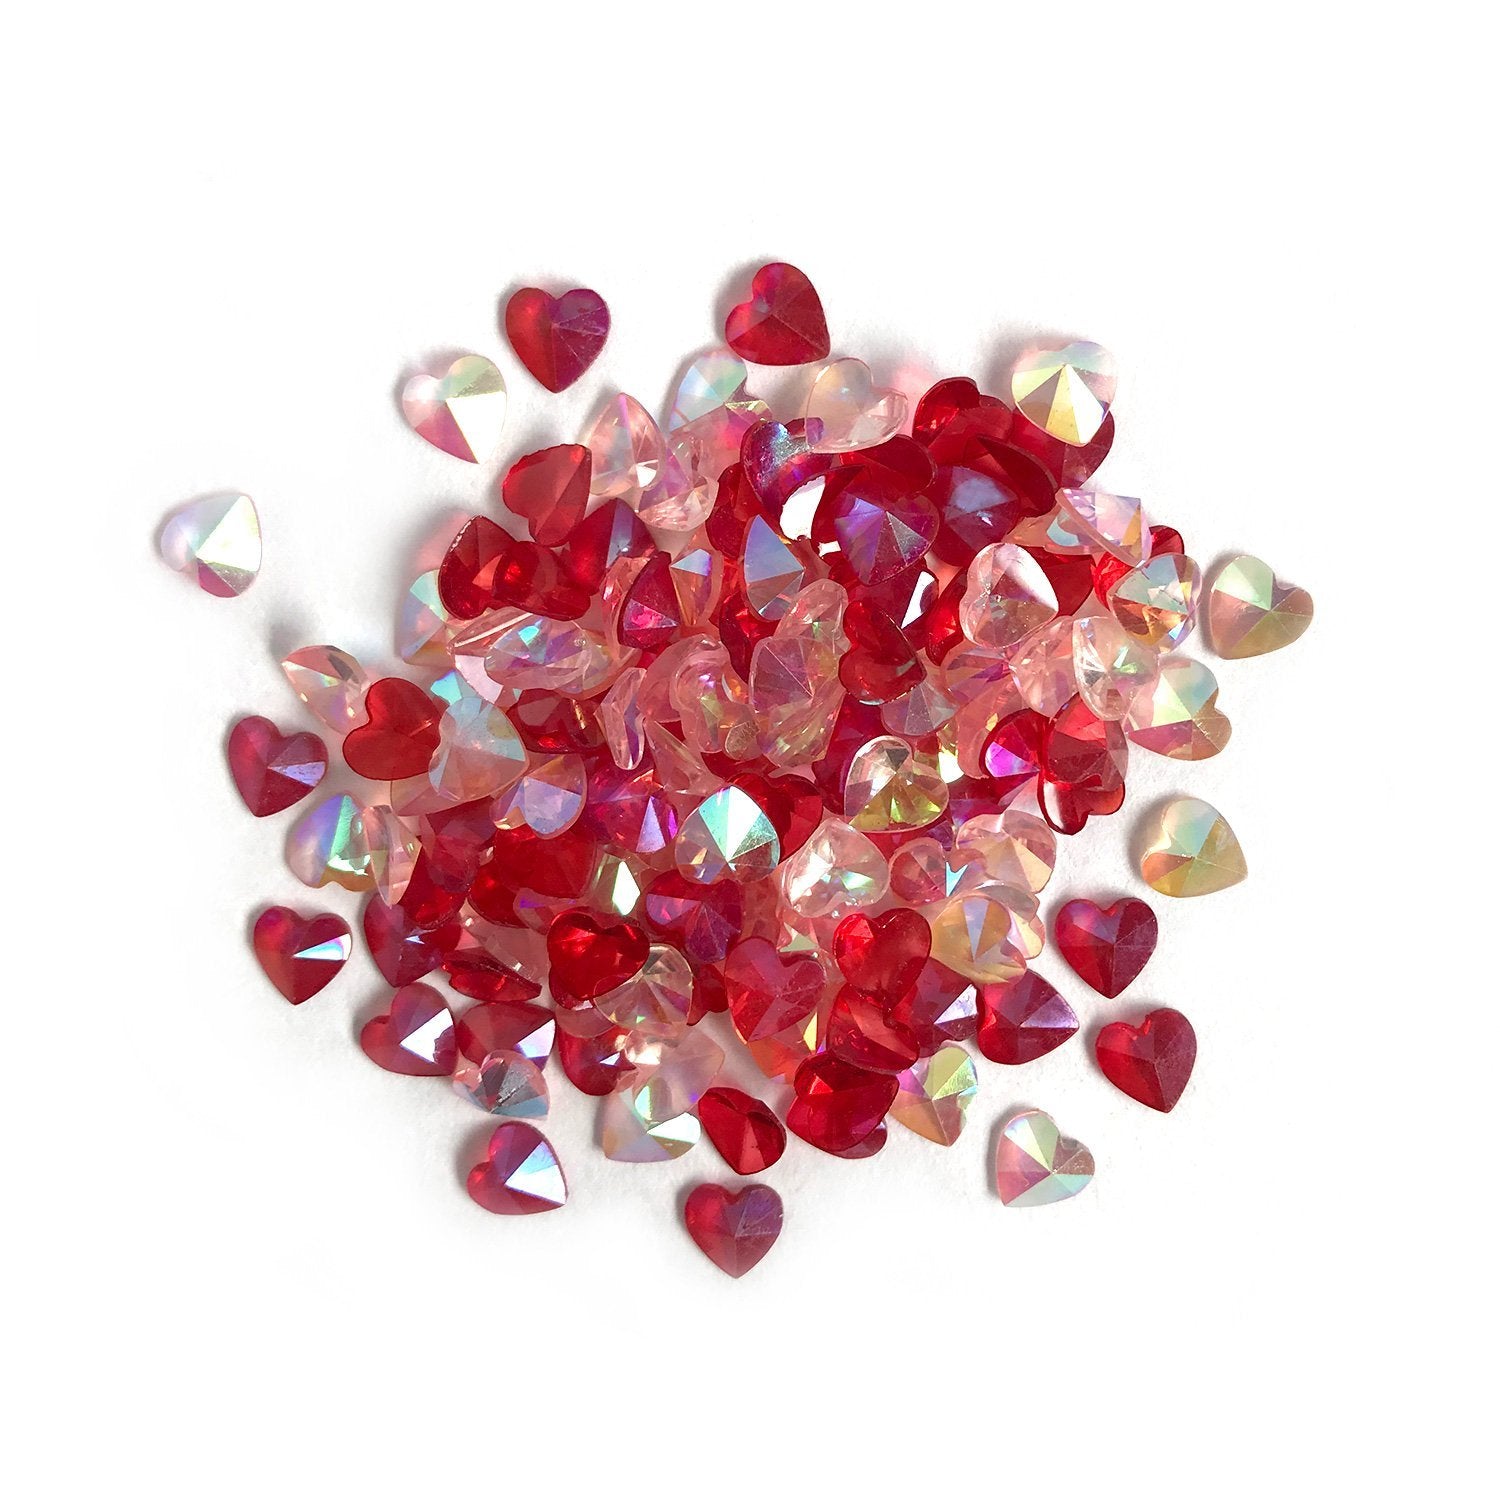 Jewels, Rhinestones, Gems and Sequins for DIY Crafts